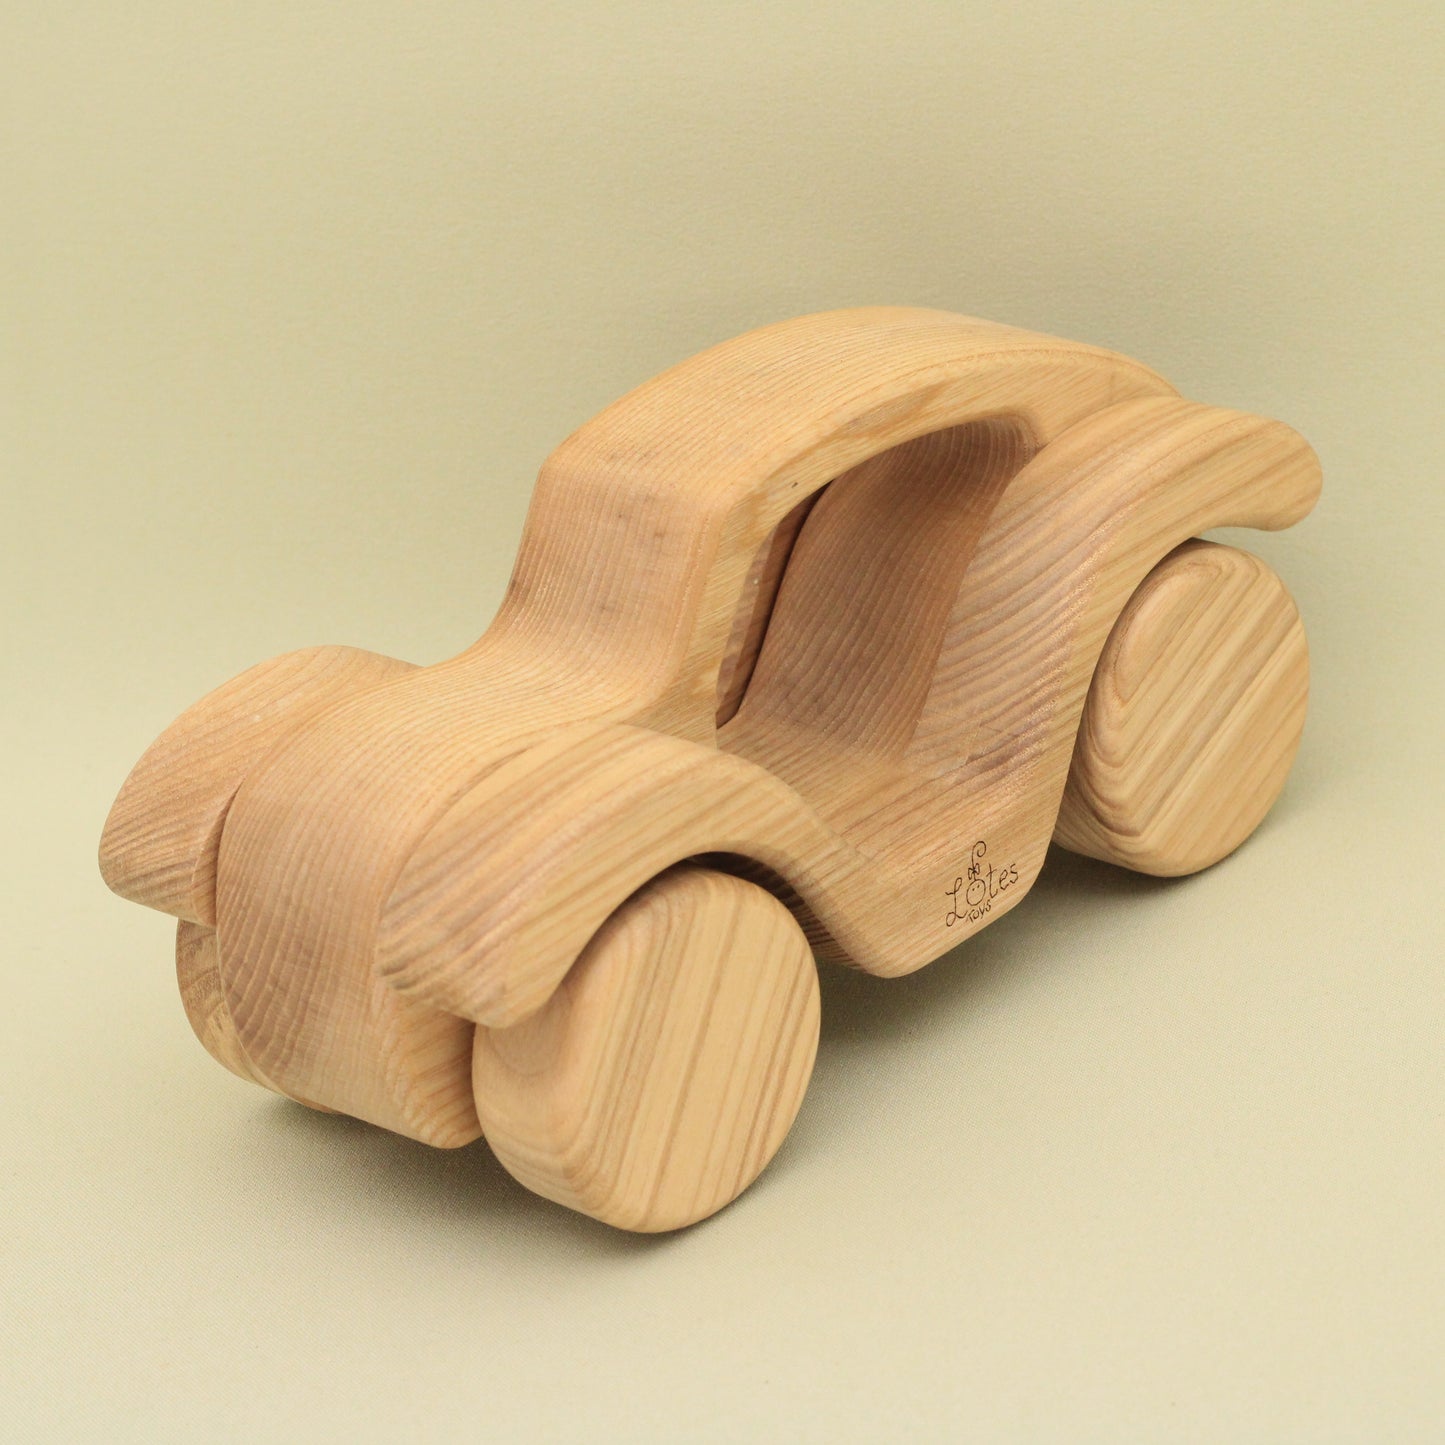 Lotes Toys Wooden Construction Vehicles Car BT73